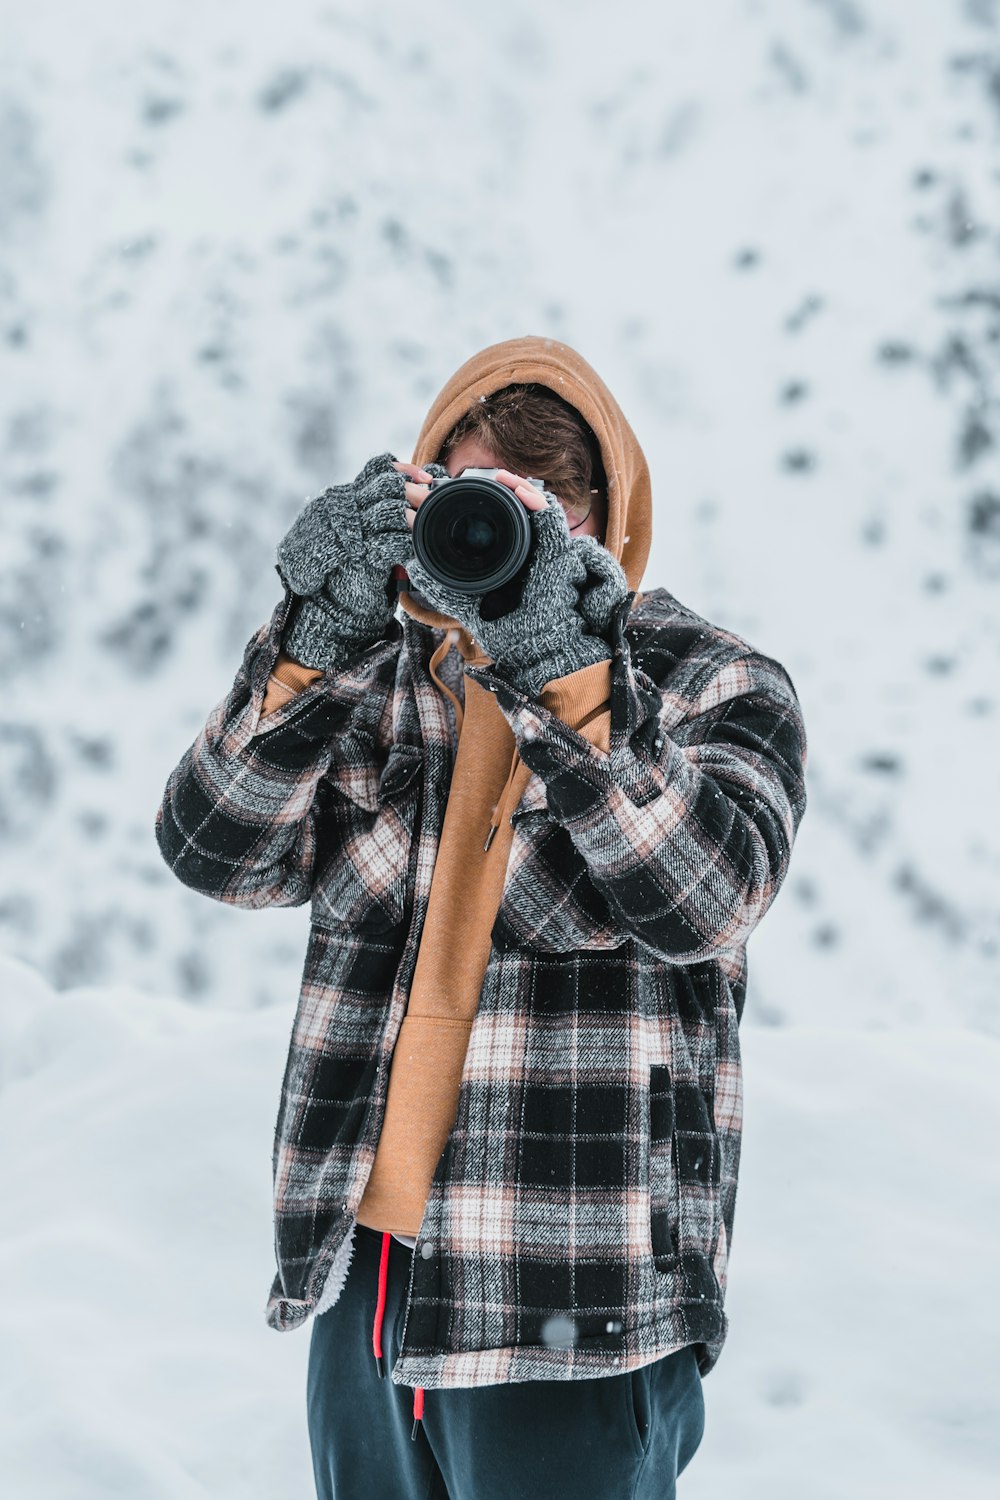 a man taking a picture with a camera in the snow